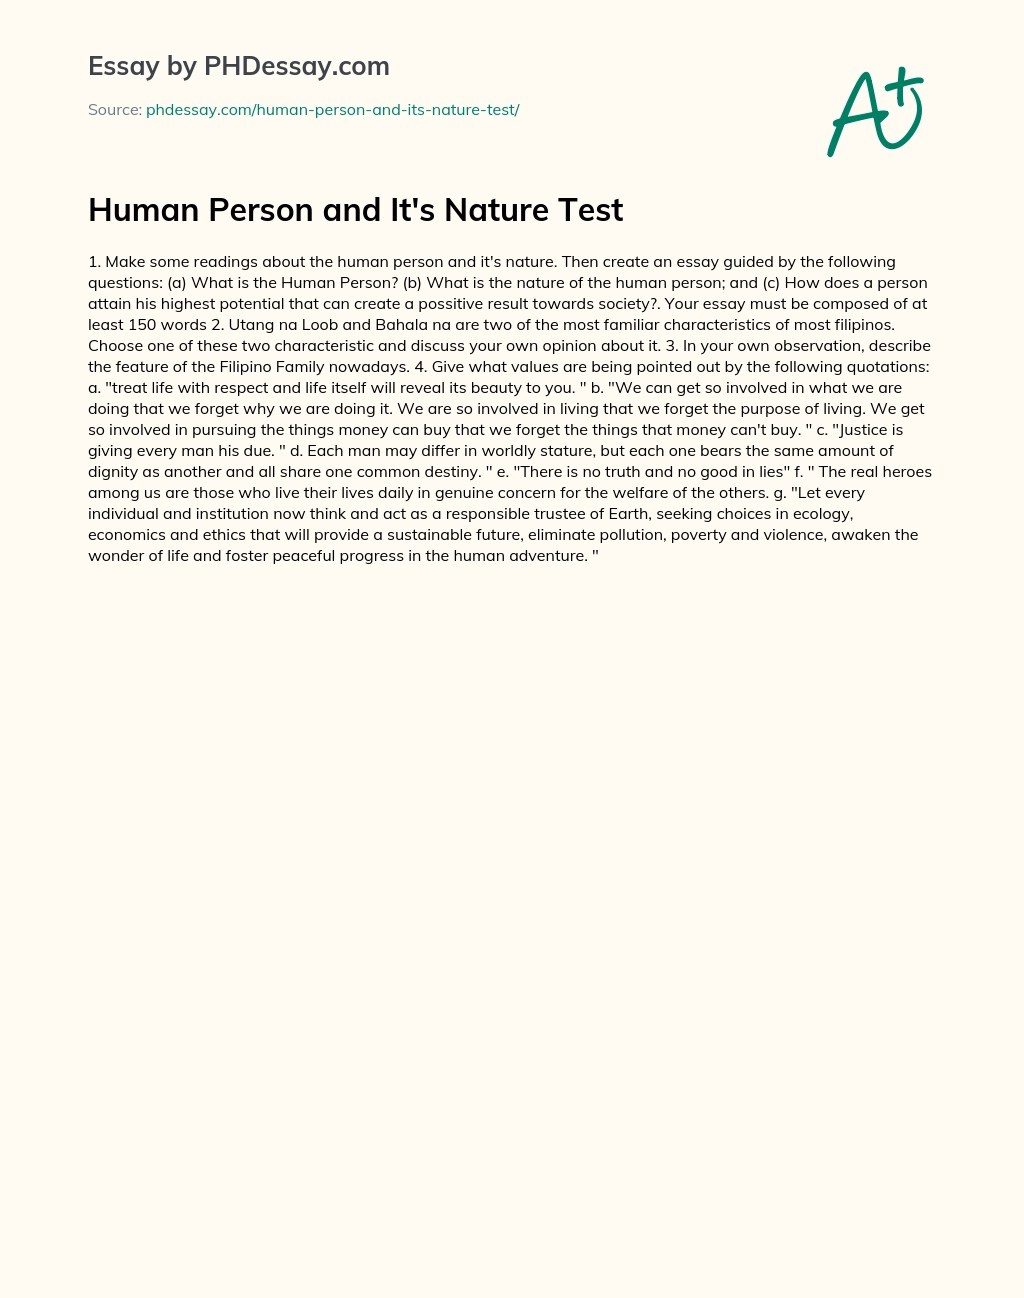 Human Person and It’s Nature Test essay